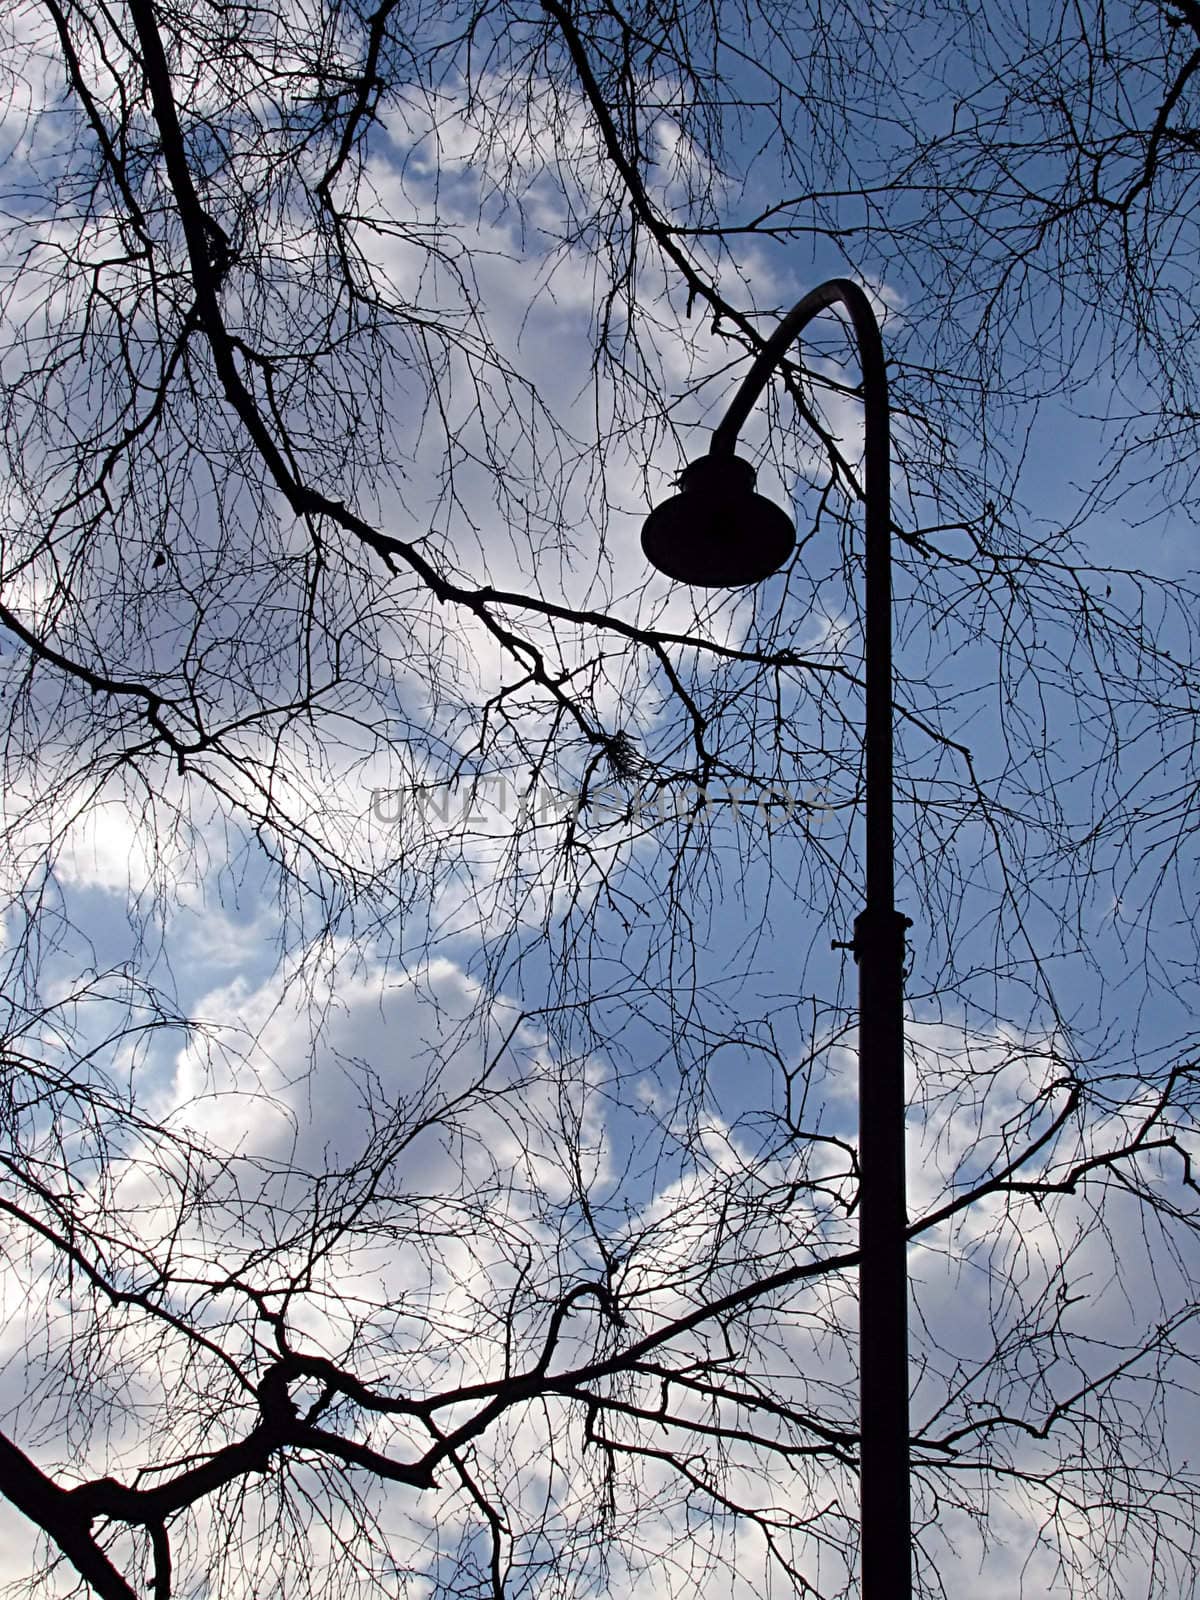 The abandoned lamppost in an old park